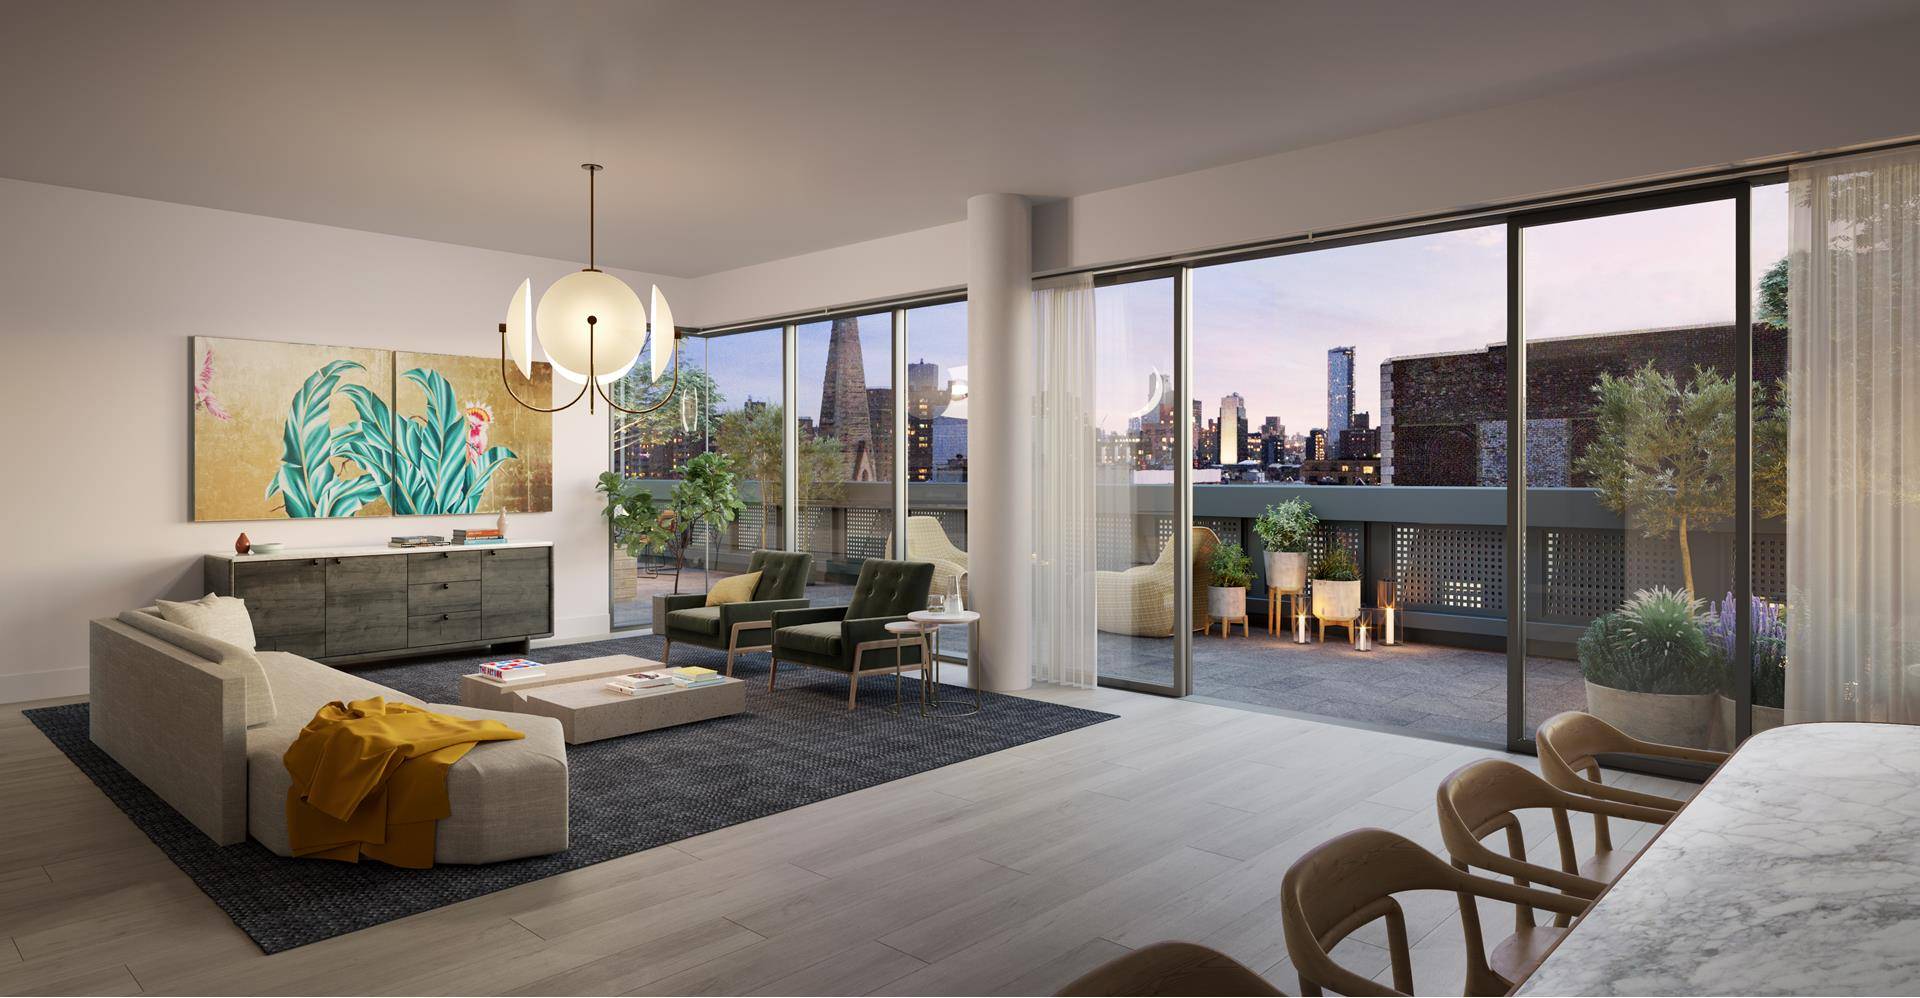 Introducing 45 East 7th Street, a truly extraordinary, landmarked new development building by one of NYCs leading architects and featuring an exclusive collection of 21 luxurious residences located at the ...